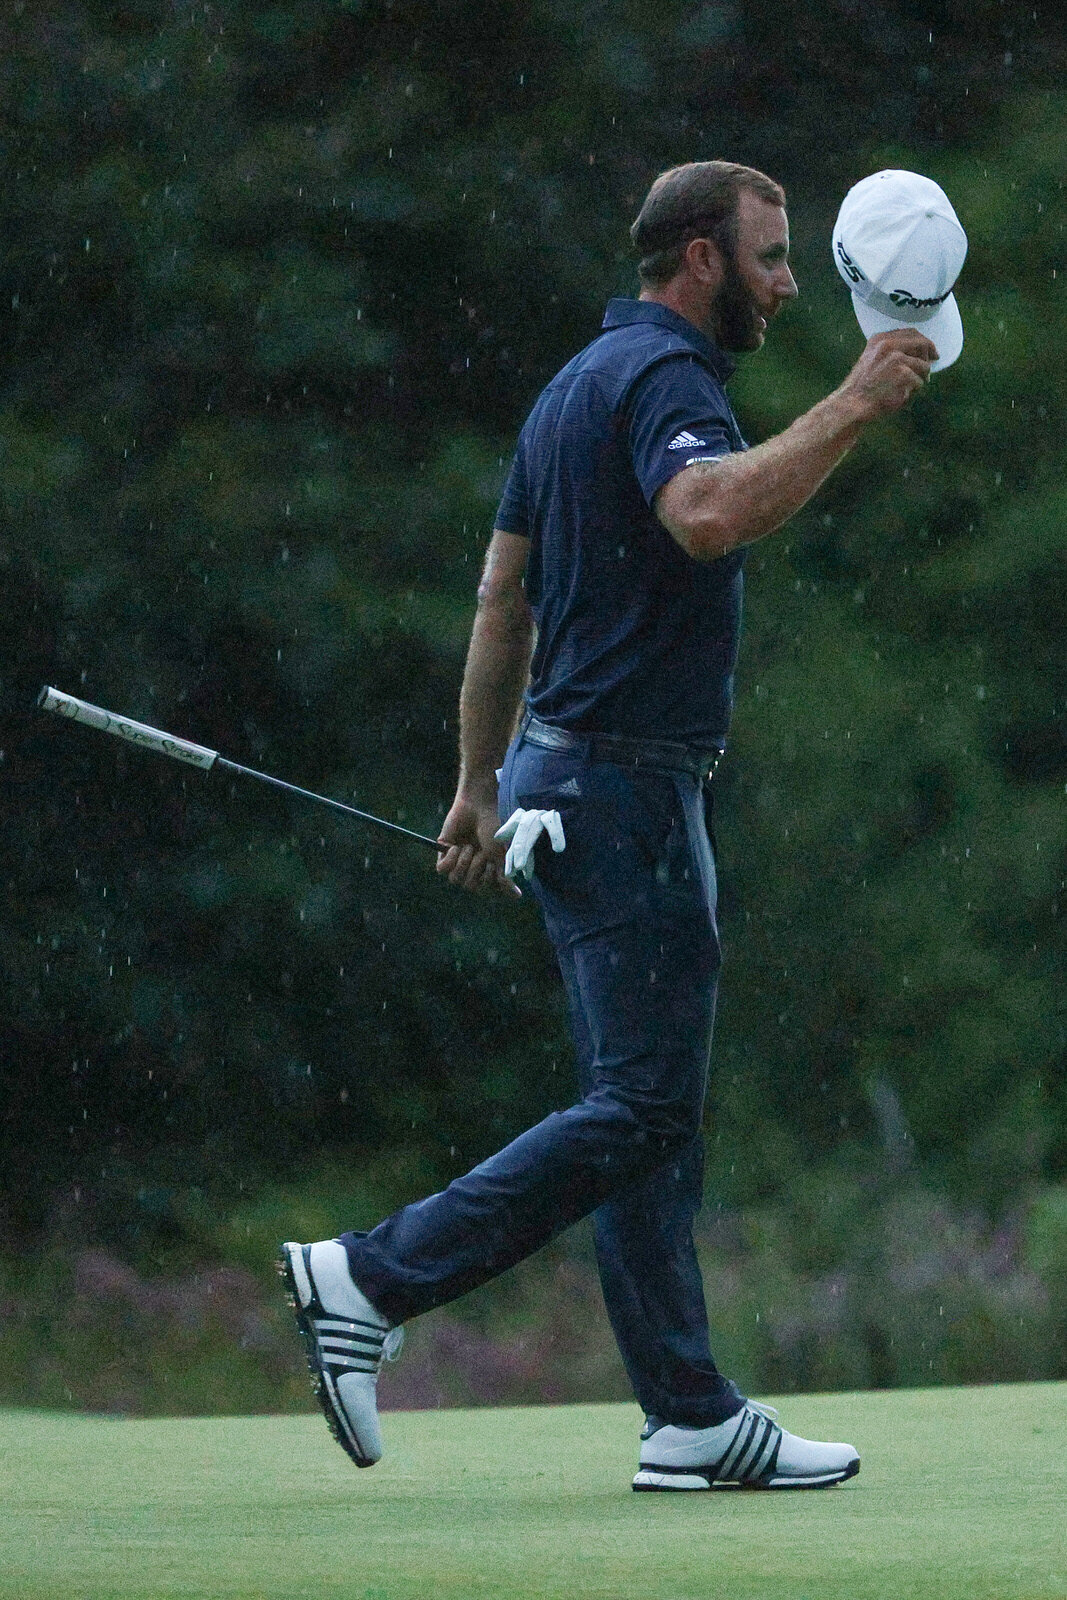  NORTON, MASSACHUSETTS - AUGUST 23: Dustin Johnson of the United States waves on the 18th green after finishing 30-under par to win during the final round of The Northern Trust at TPC Boston on August 23, 2020 in Norton, Massachusetts. (Photo by Madd